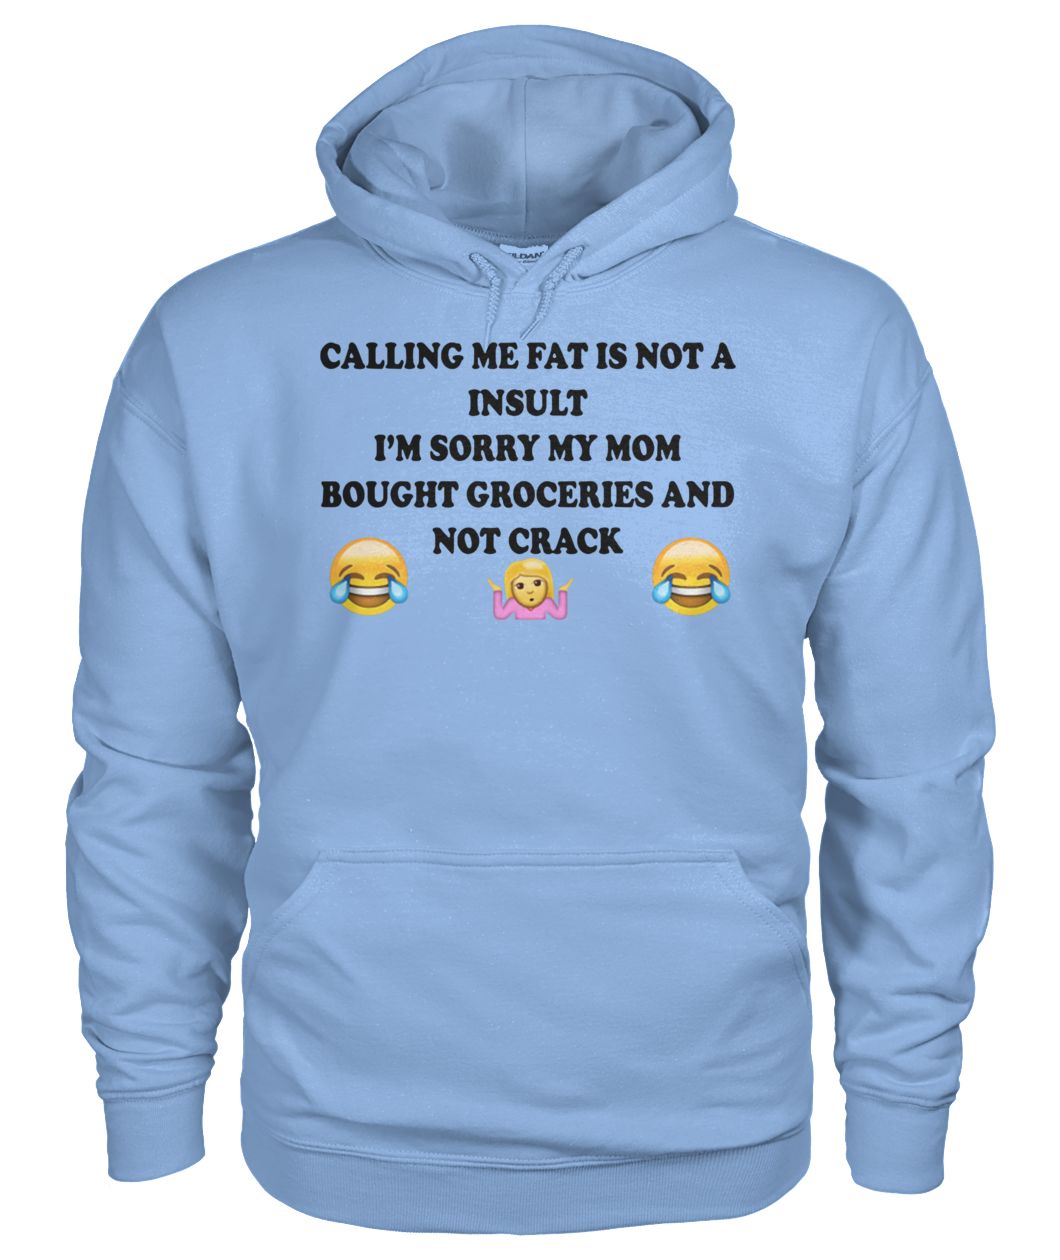 Calling me fat is not a insult I’m sorry my mom bought groceries and not crack gildan hoodie